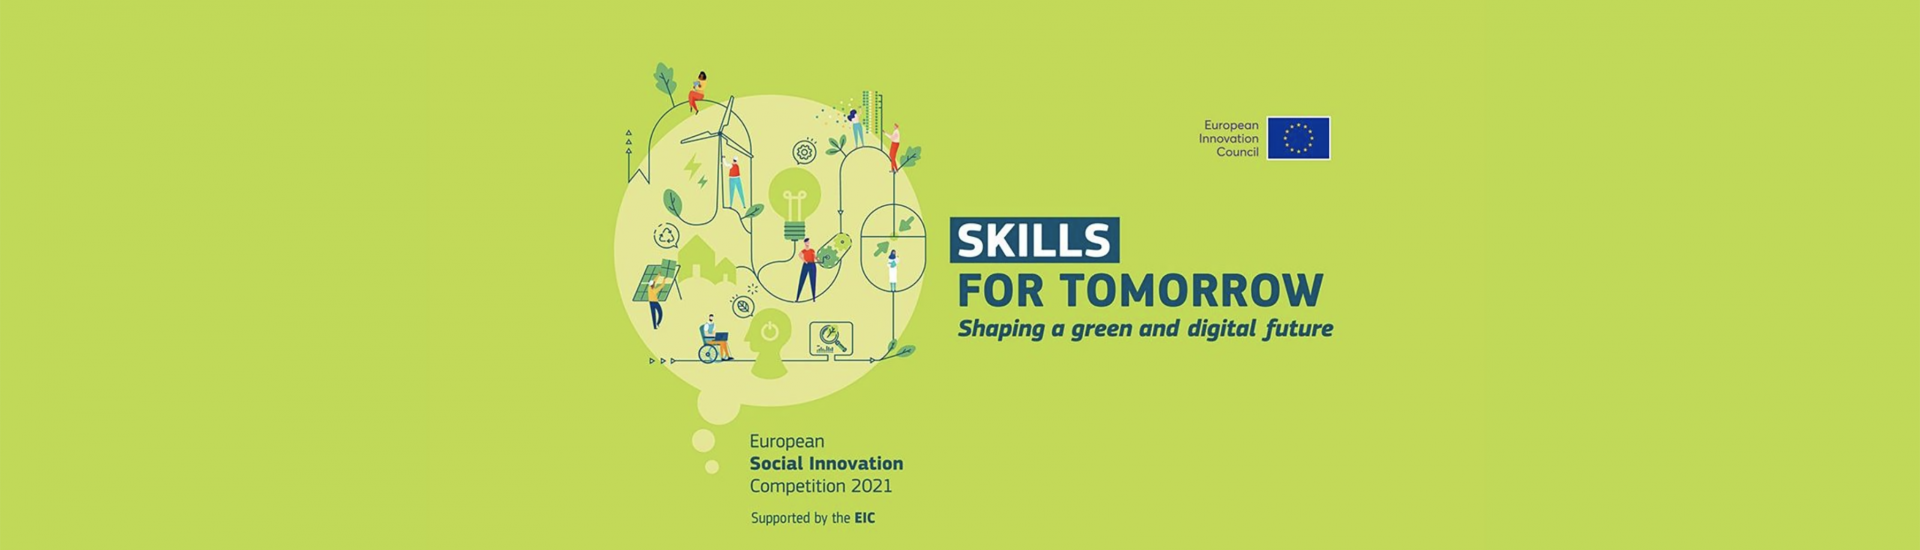 European Social Innovation Competition 2021